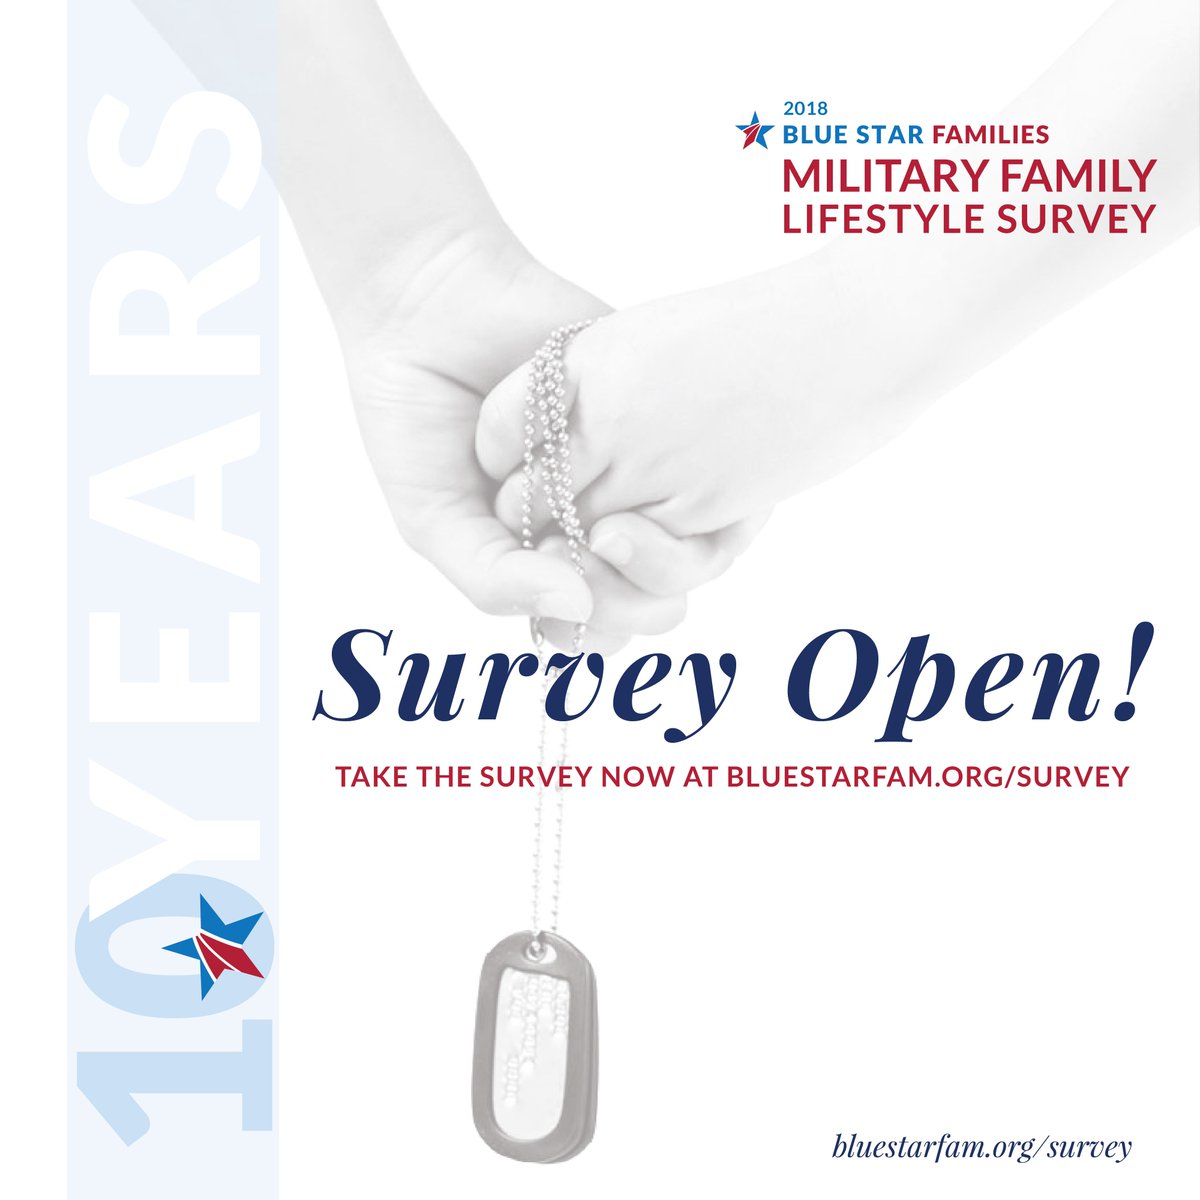 The 2018 #BSFSurvey  is open from April 23 until May 25 for those affiliated with the  military community! Thank you for your annually commitment to take this survey; your impact goes far beyond the time you spend completing the survey. Take the survey: bluestarfam.us/BSFSurvey18